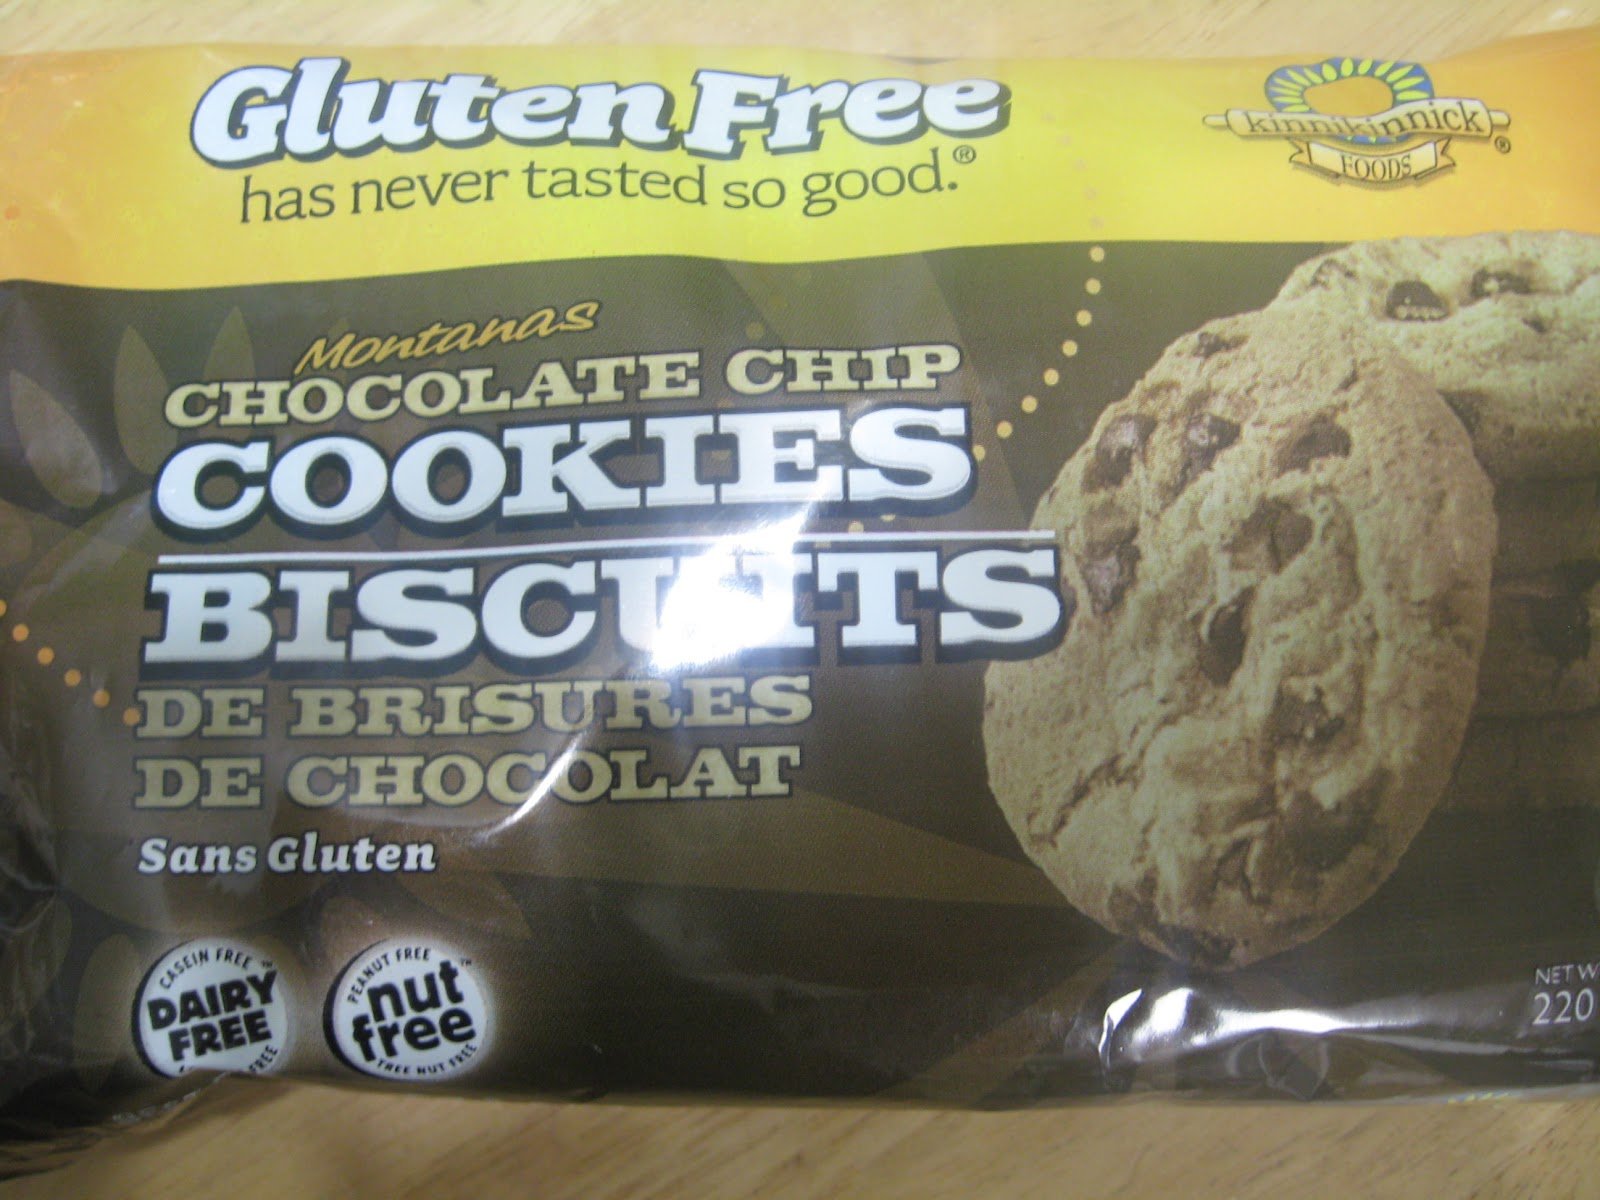 What will we eat?: Gluten free, nut free, dairy free cookies!